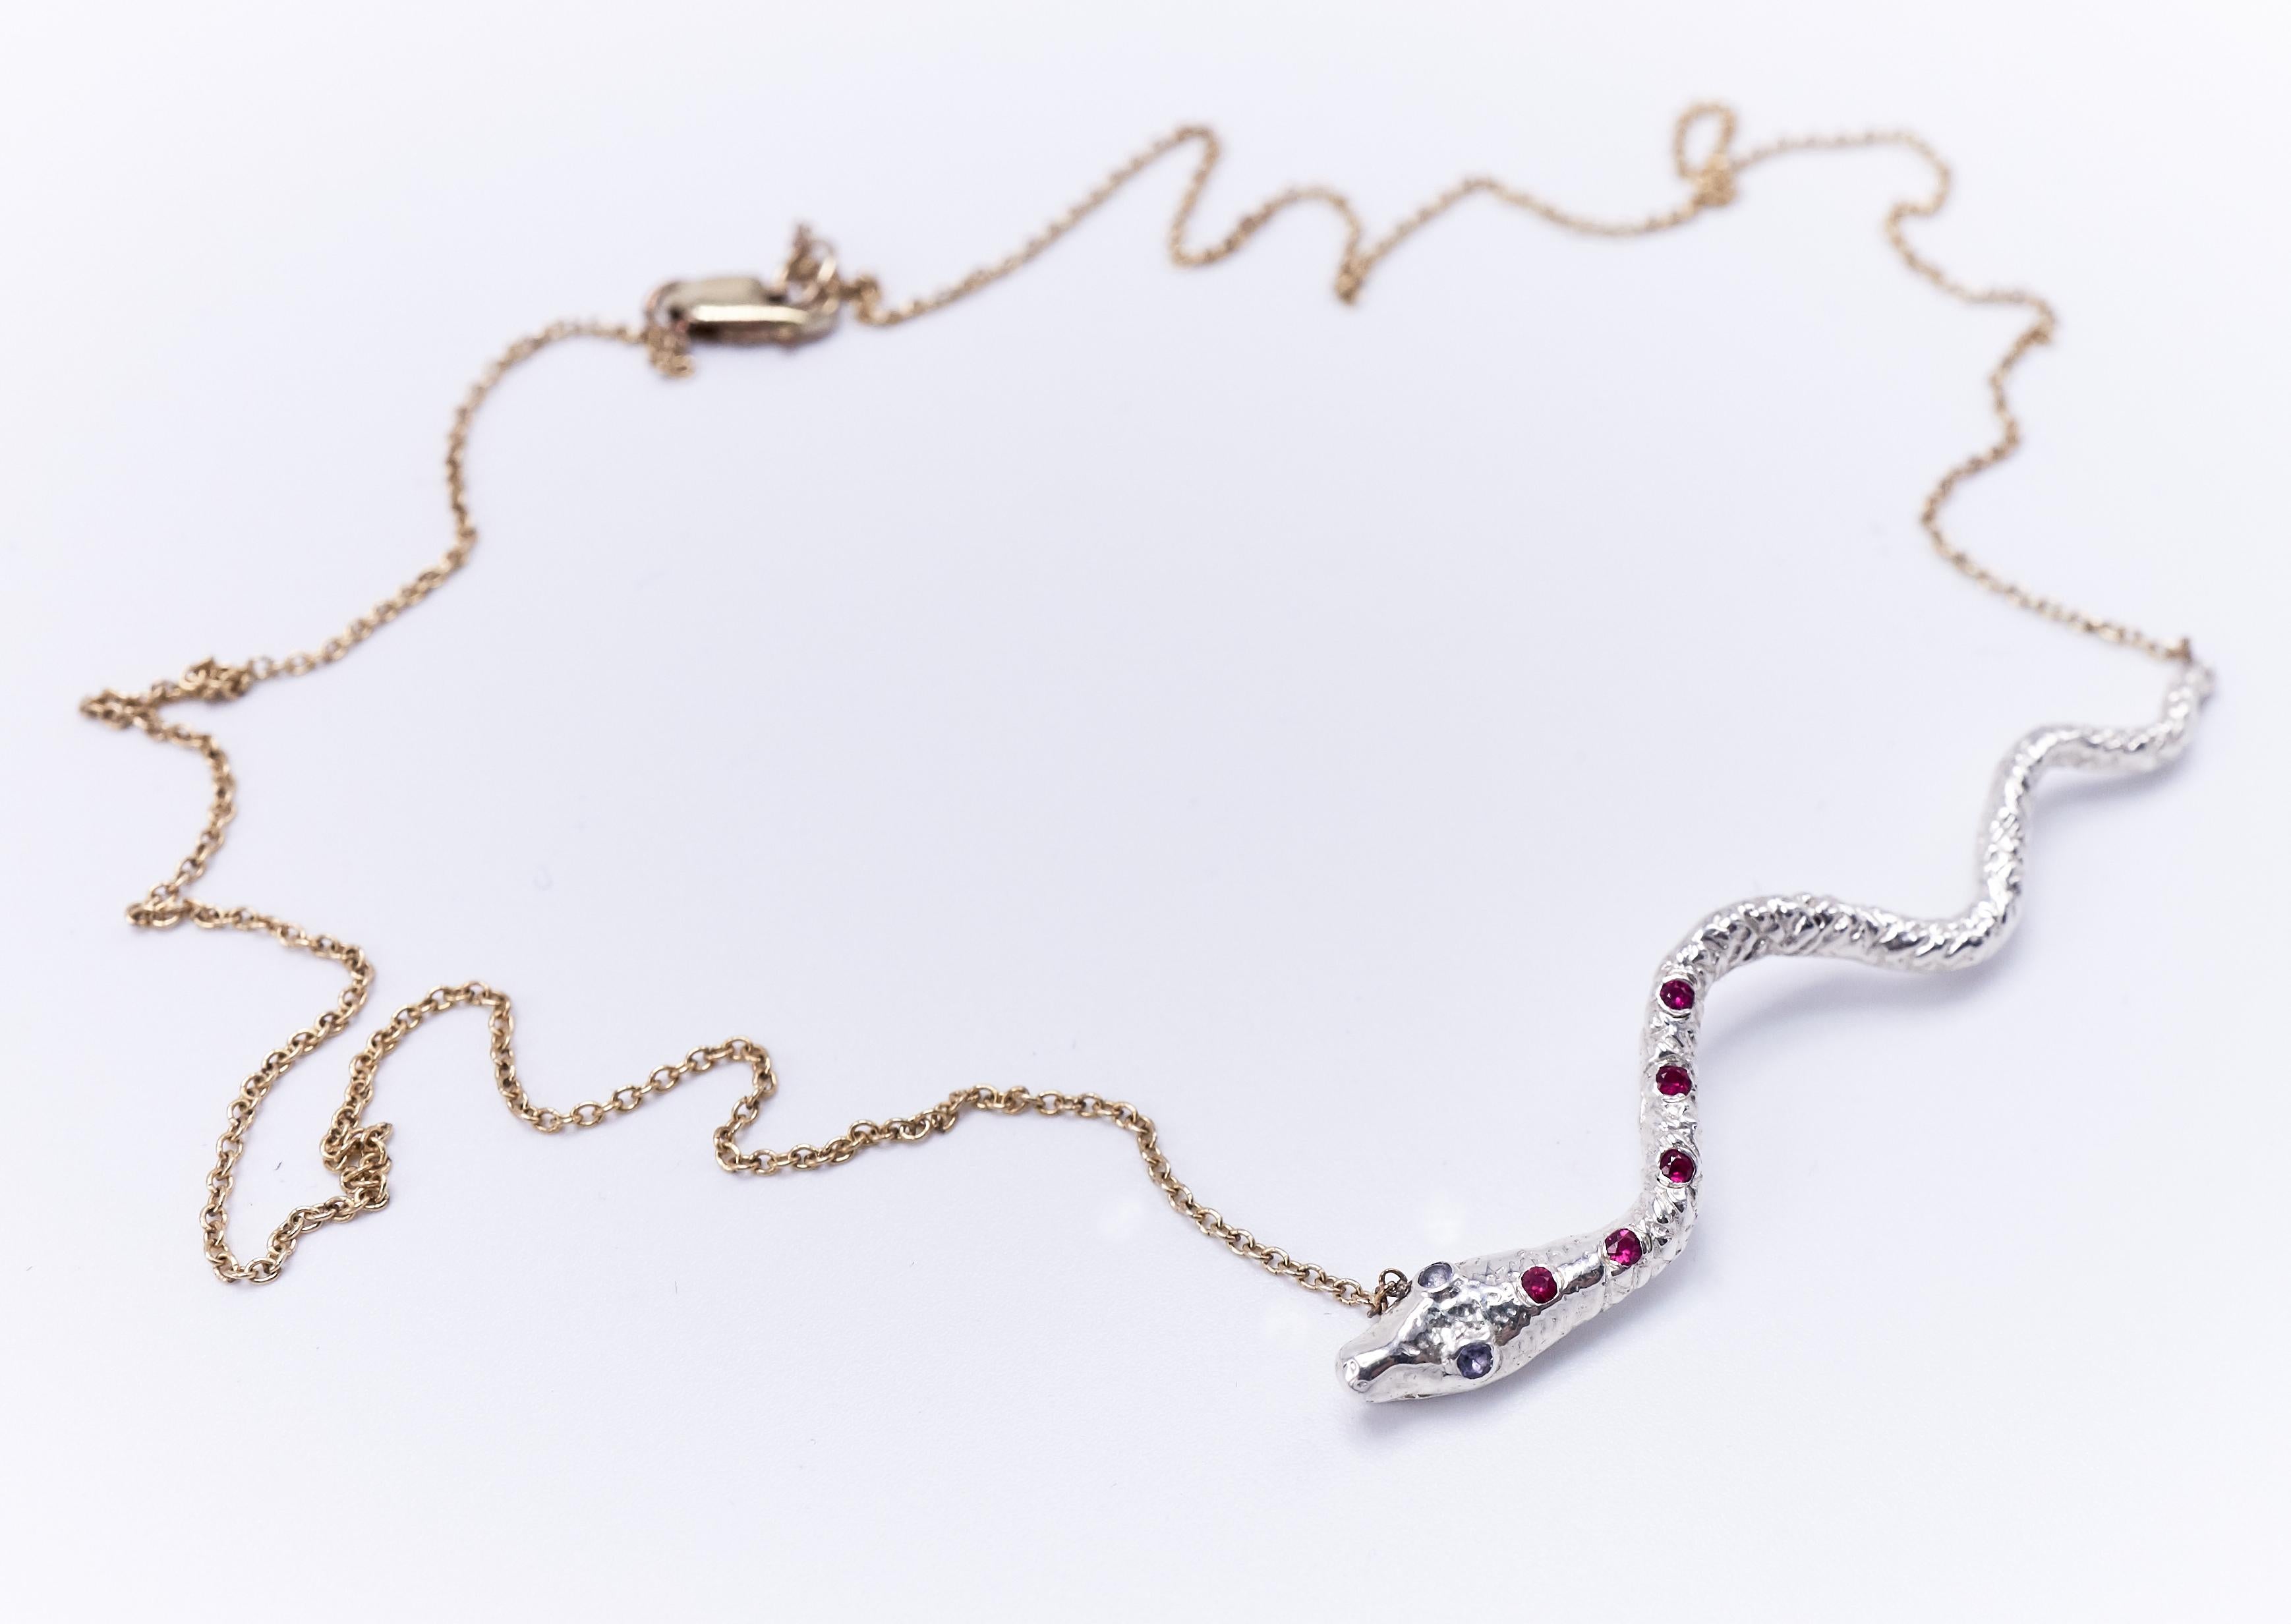 Round Cut Ruby Iolite Snake  Necklace Silver Gold Filled Chain J Dauphin For Sale